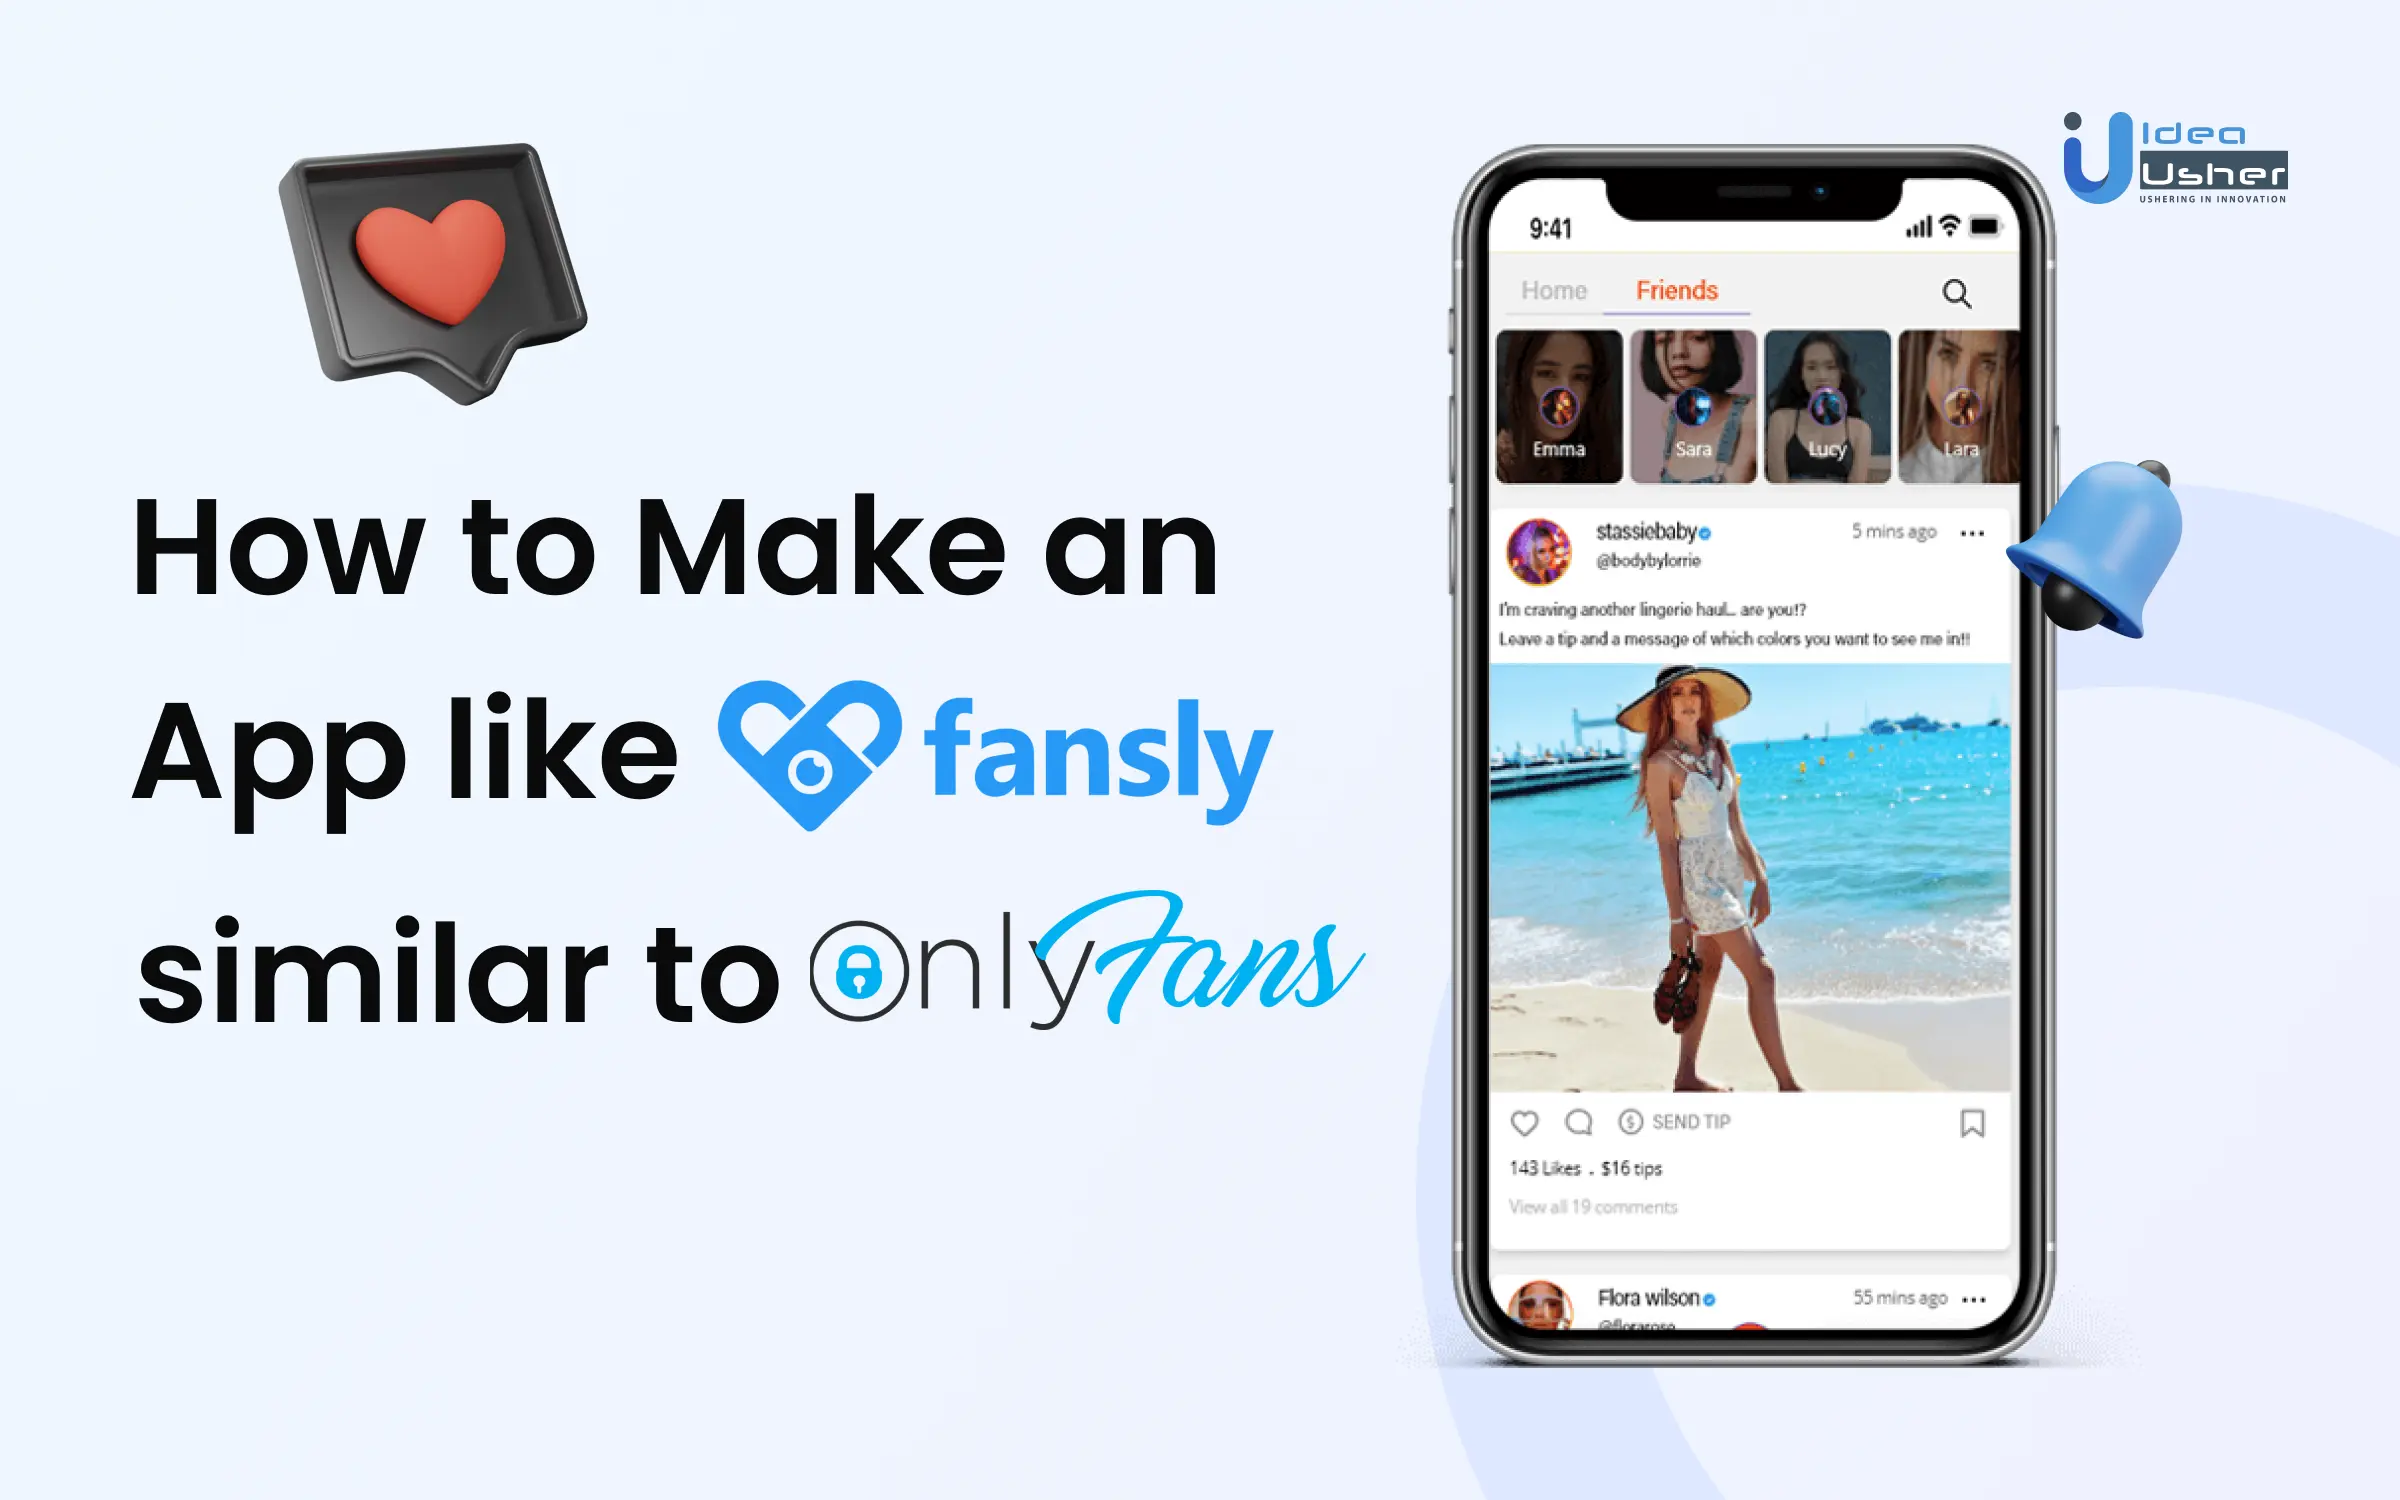 Discover a New World of Onlyfans and Fansly Models on hotties.club